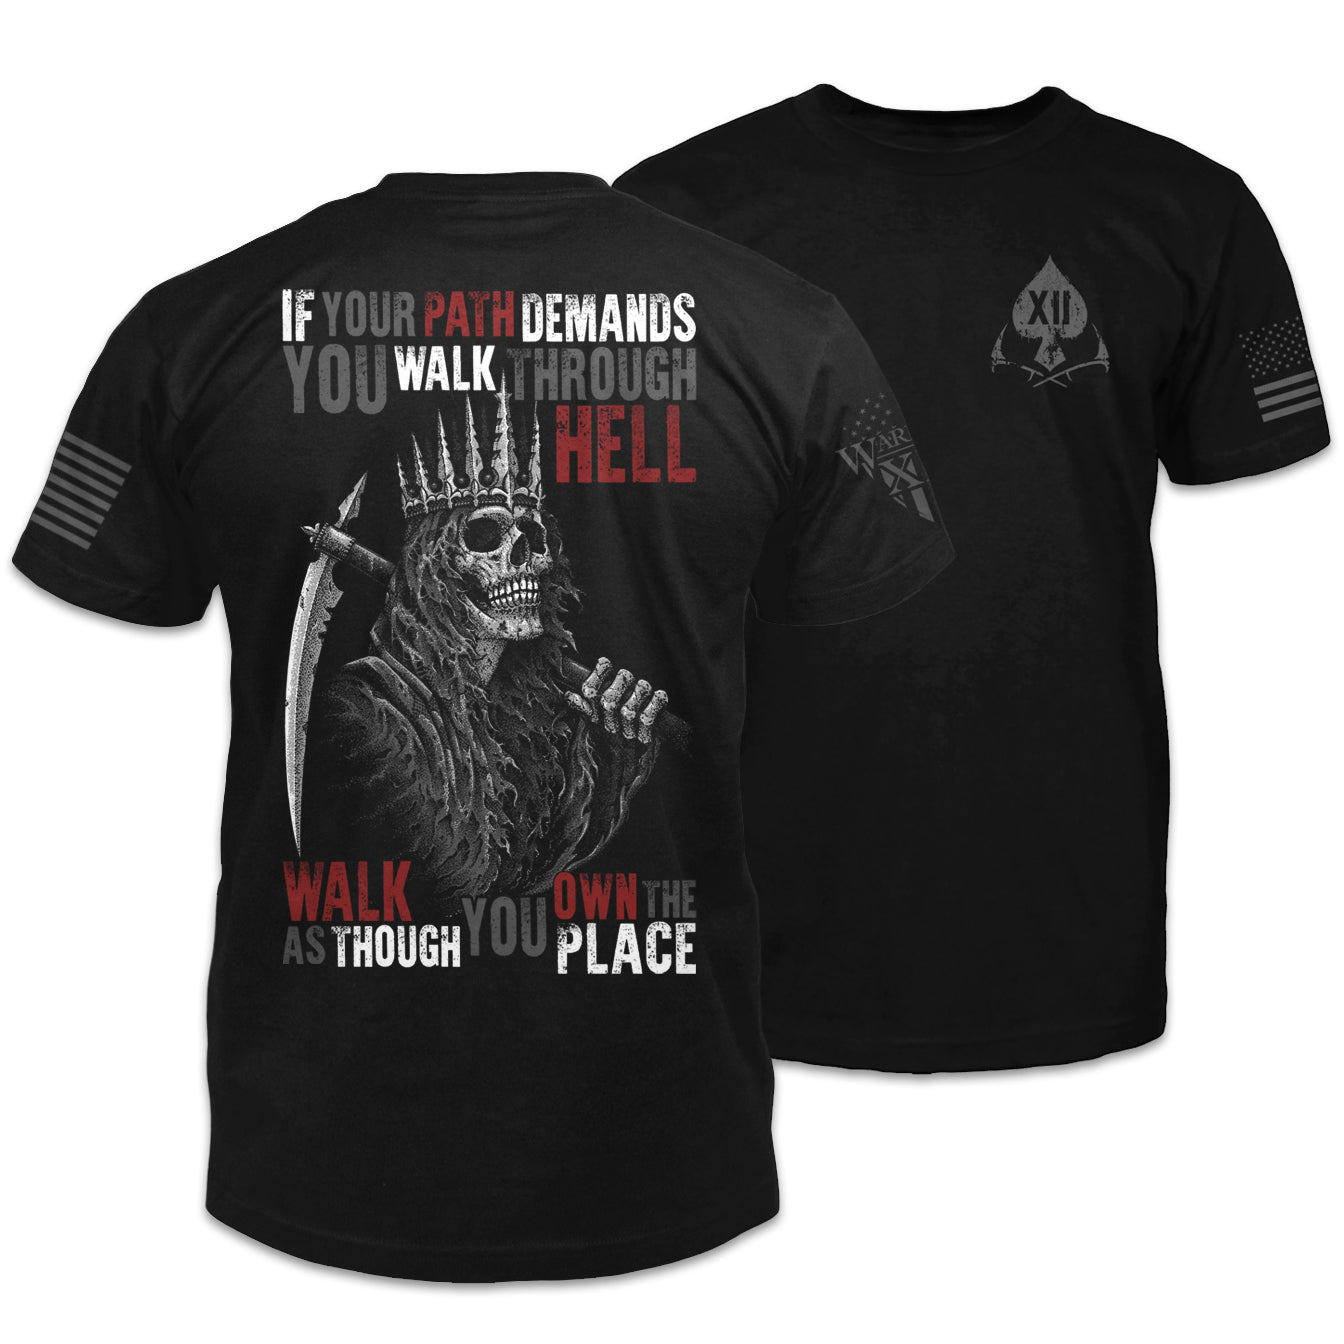 A front and back black t-shirt with the words "If your path demands you walk through hell, walk as though you own the place" and a reaper printed on the shirt.